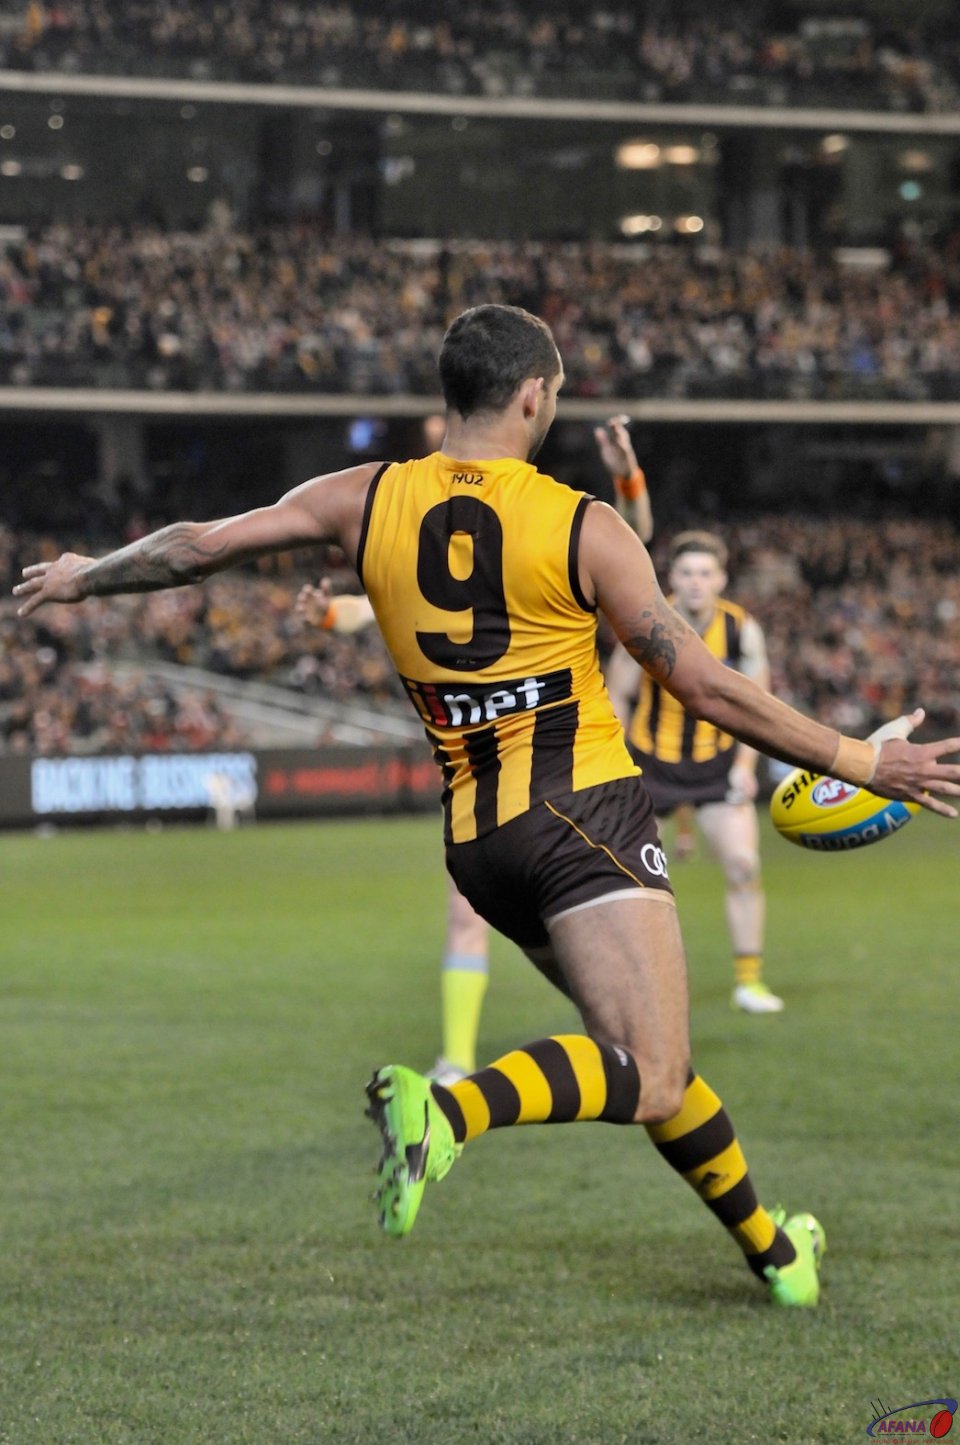 Silky smooth skills from the 300 game premiership player as he scores